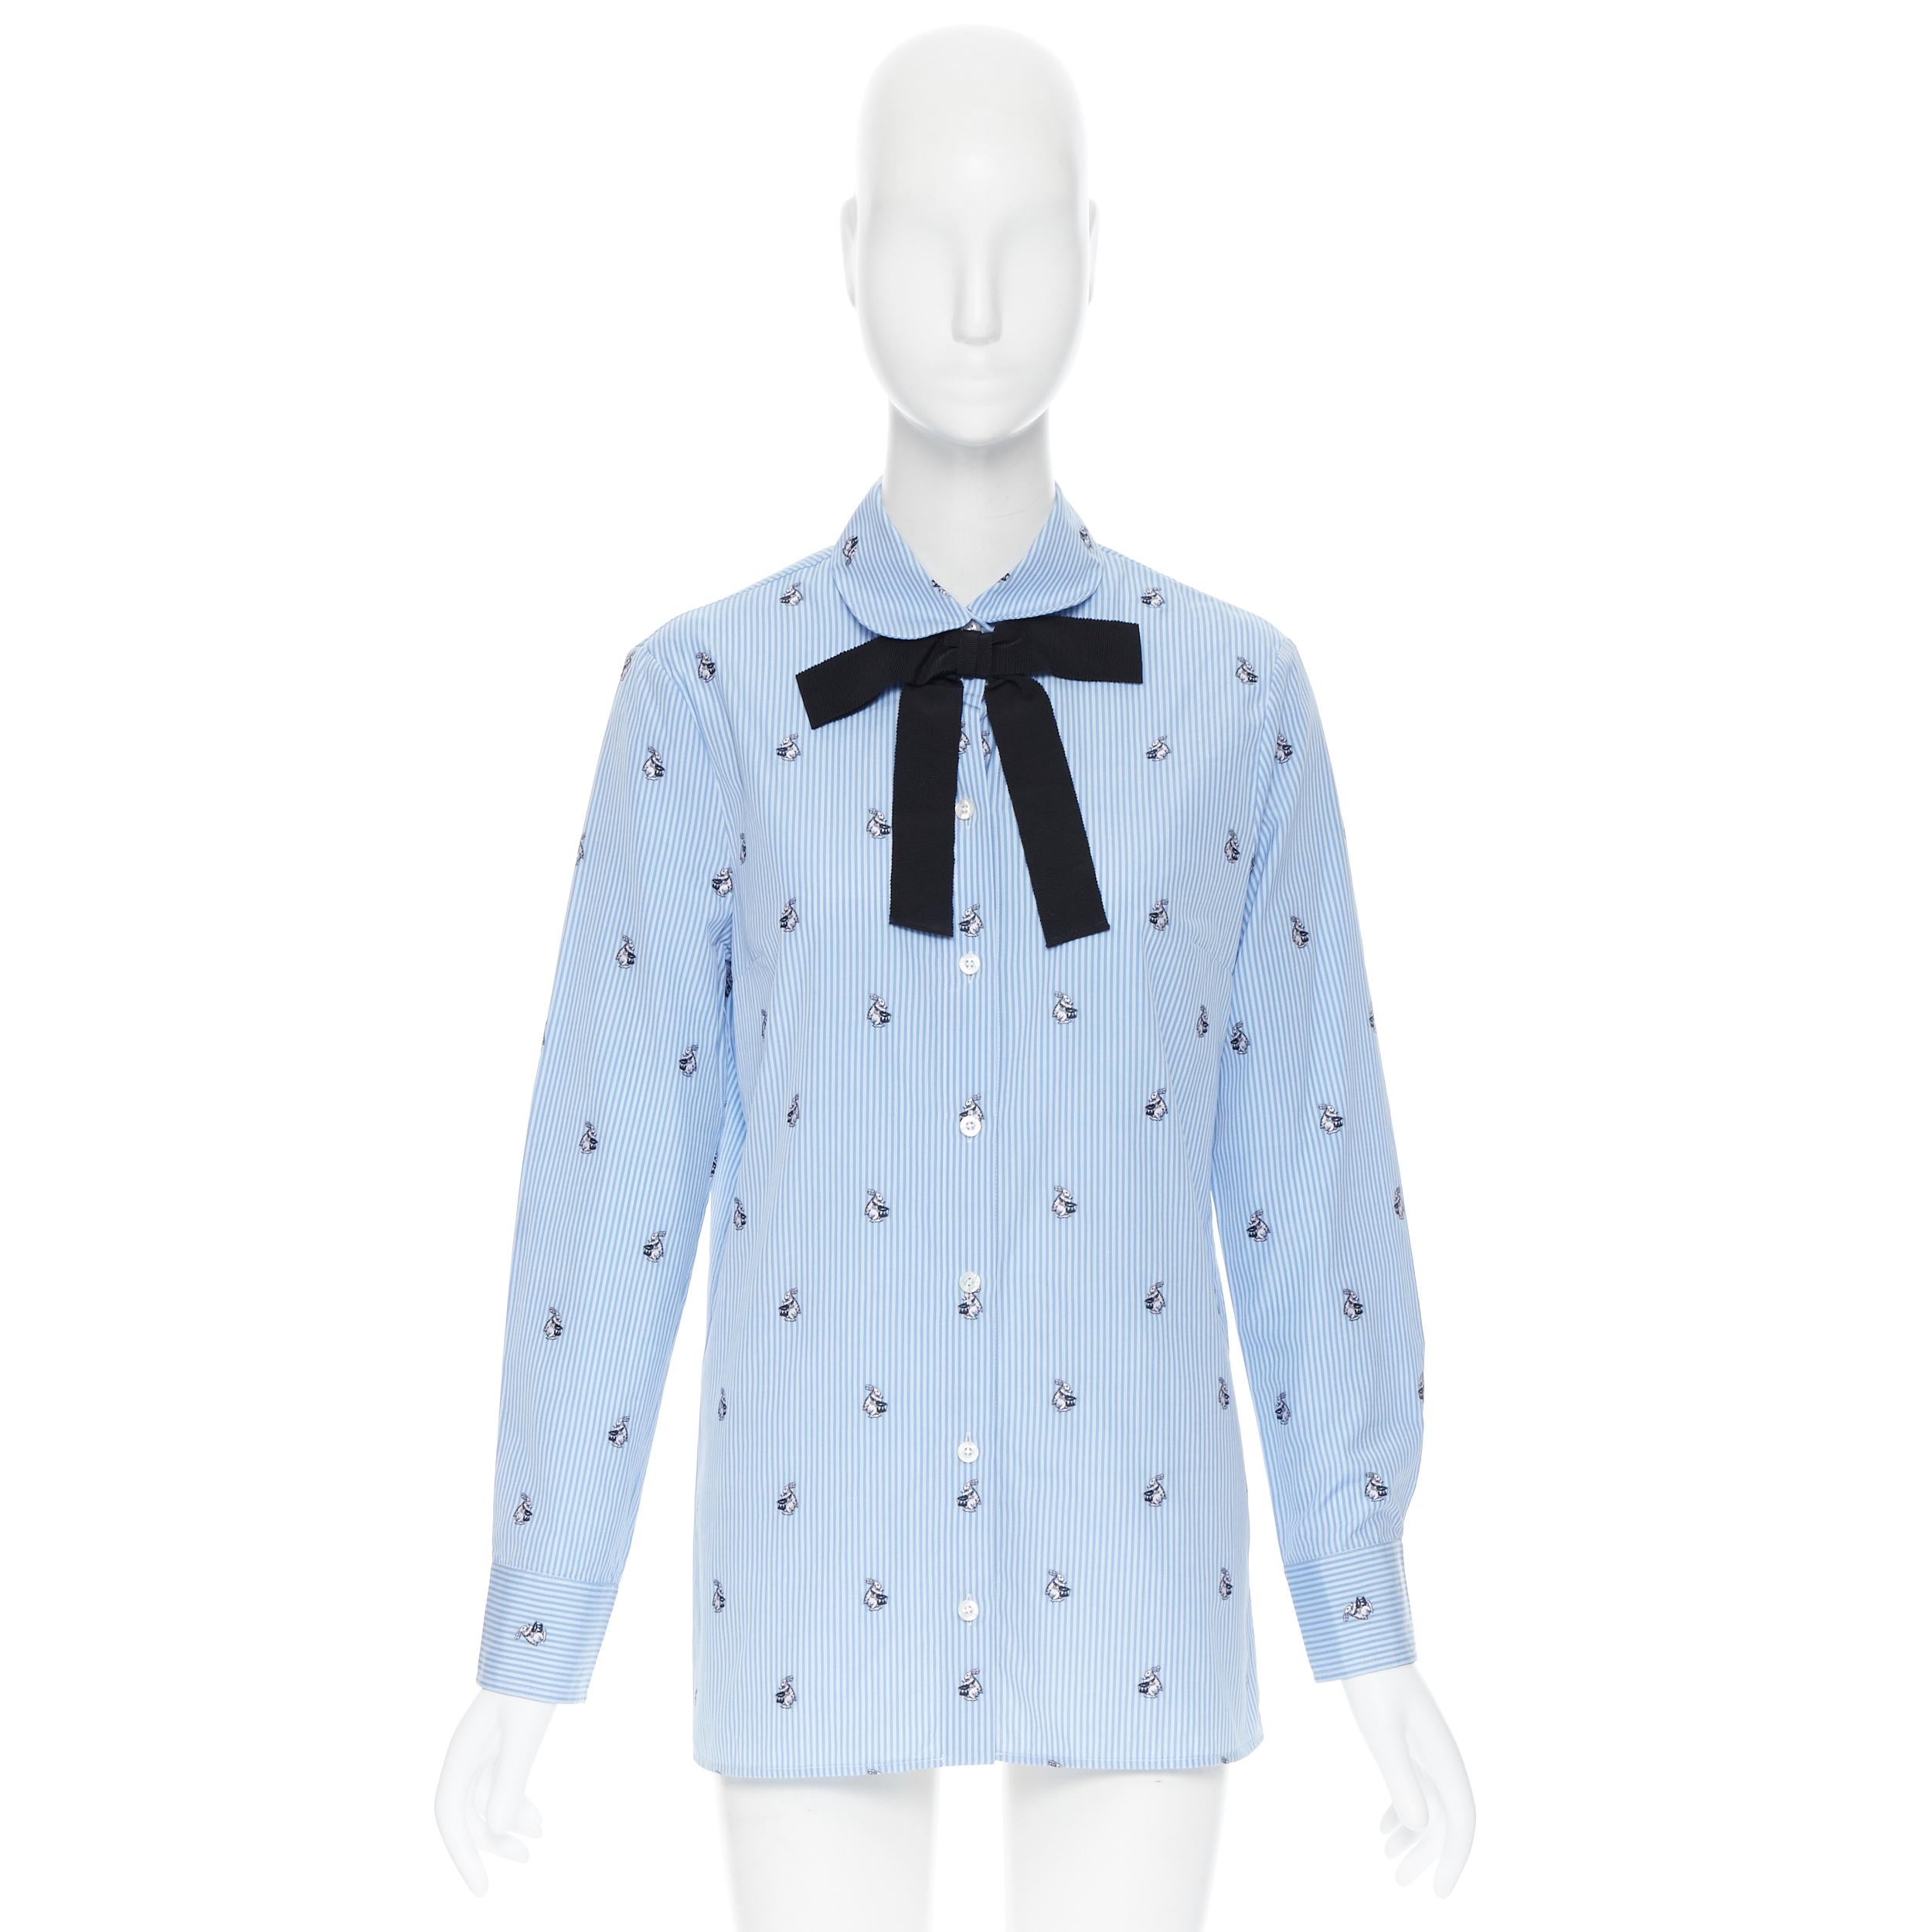 GUCCI Peter Rabbit blue white striped print grosgrain bow long sleeve shirt IT42
Brand: Gucci
Collection: Peter Rabbit collection
Model Name / Style: Cotton shirt
Material: Cotton
Color: Blue
Pattern: Striped
Closure: Button
Extra Detail: Rounded